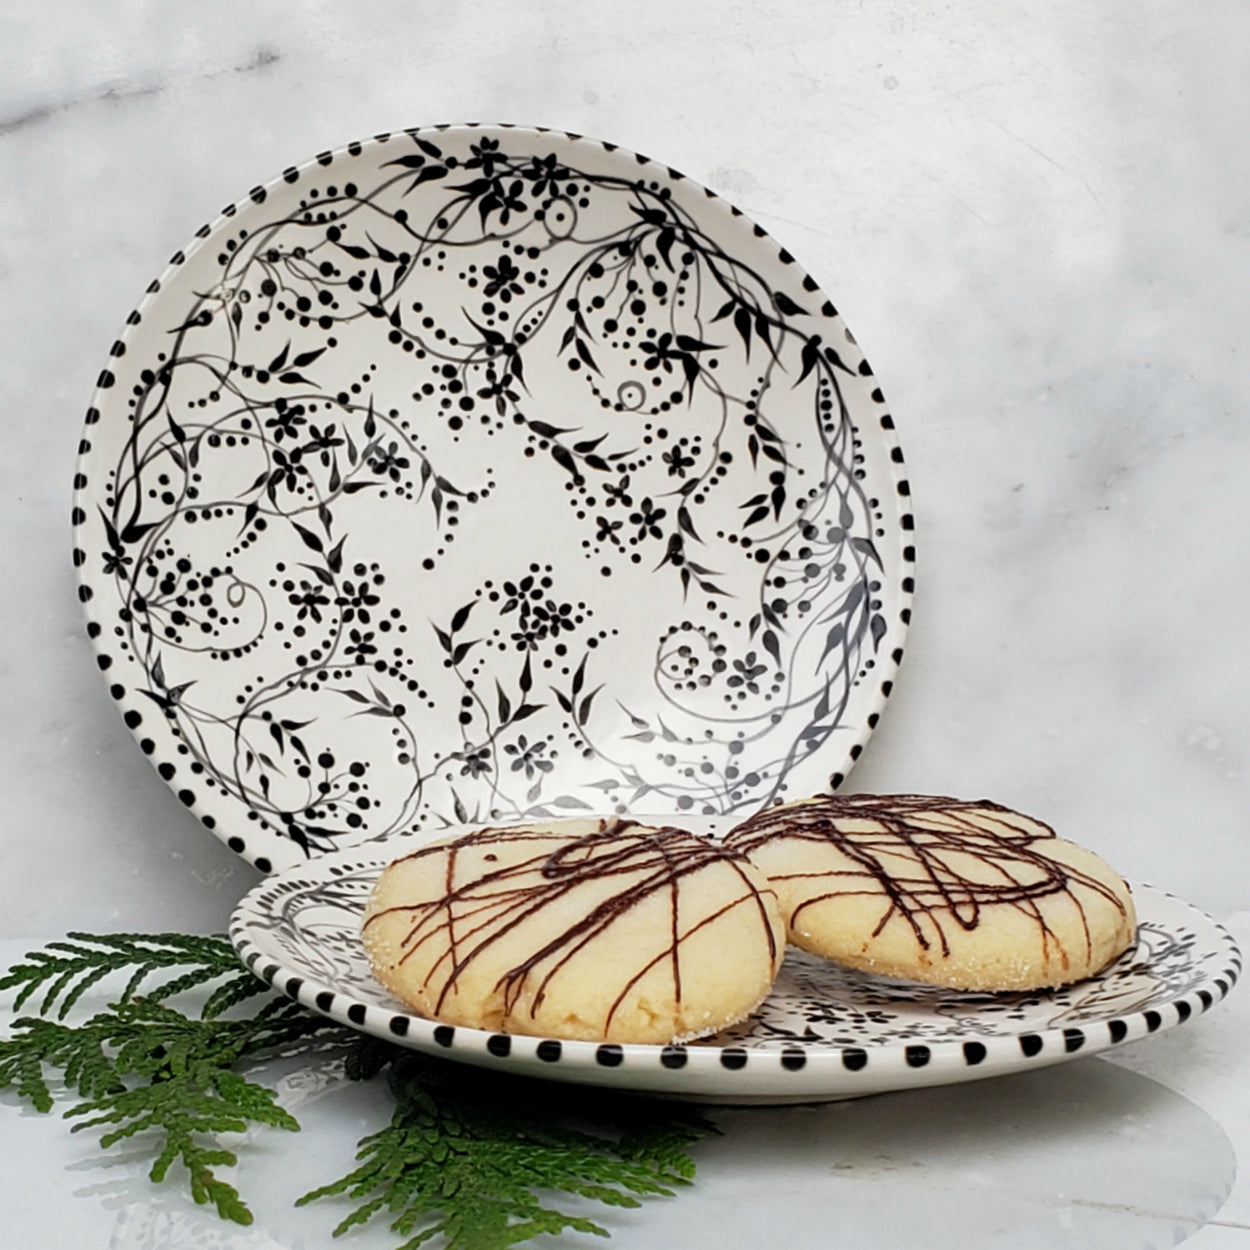 6" hand painted black and white desert plate with teeny trailing vines and sweet flowers and polka dots.